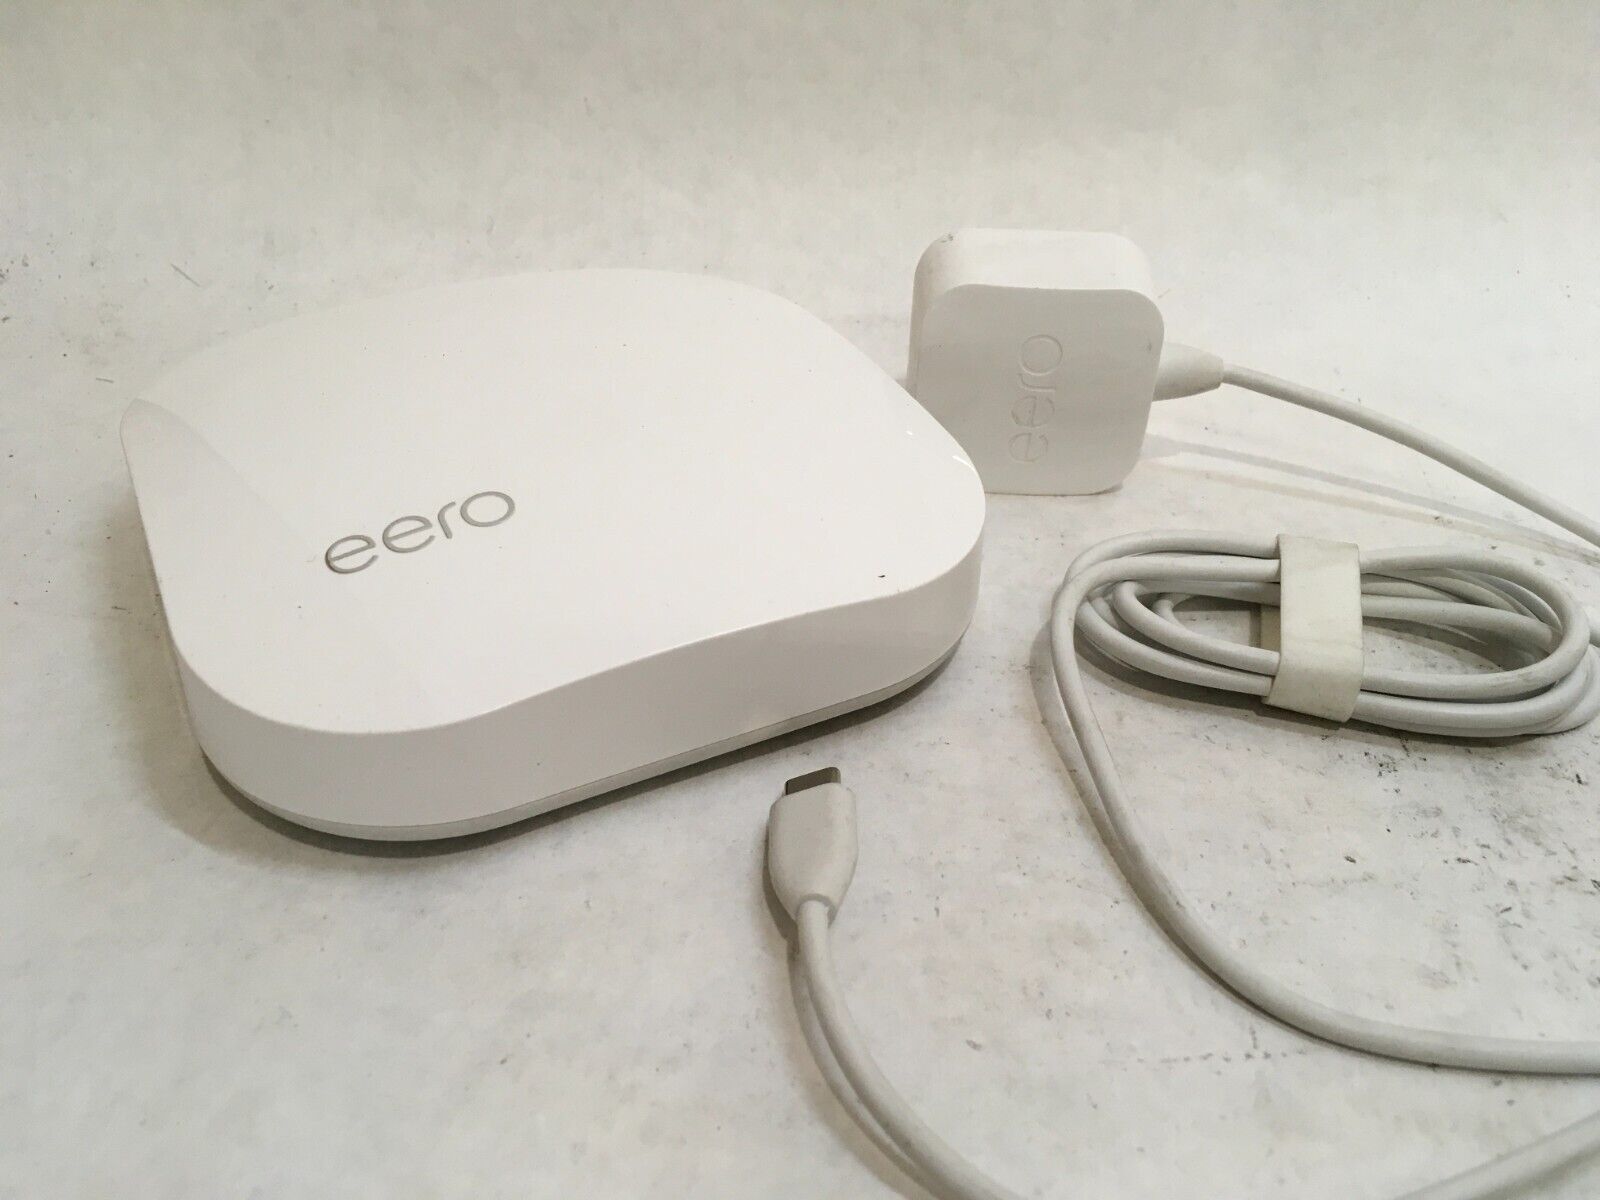 Eero B010001 Pro 2nd Generation Tri-Band AC Home Mesh Wifi Router w/ no adapter